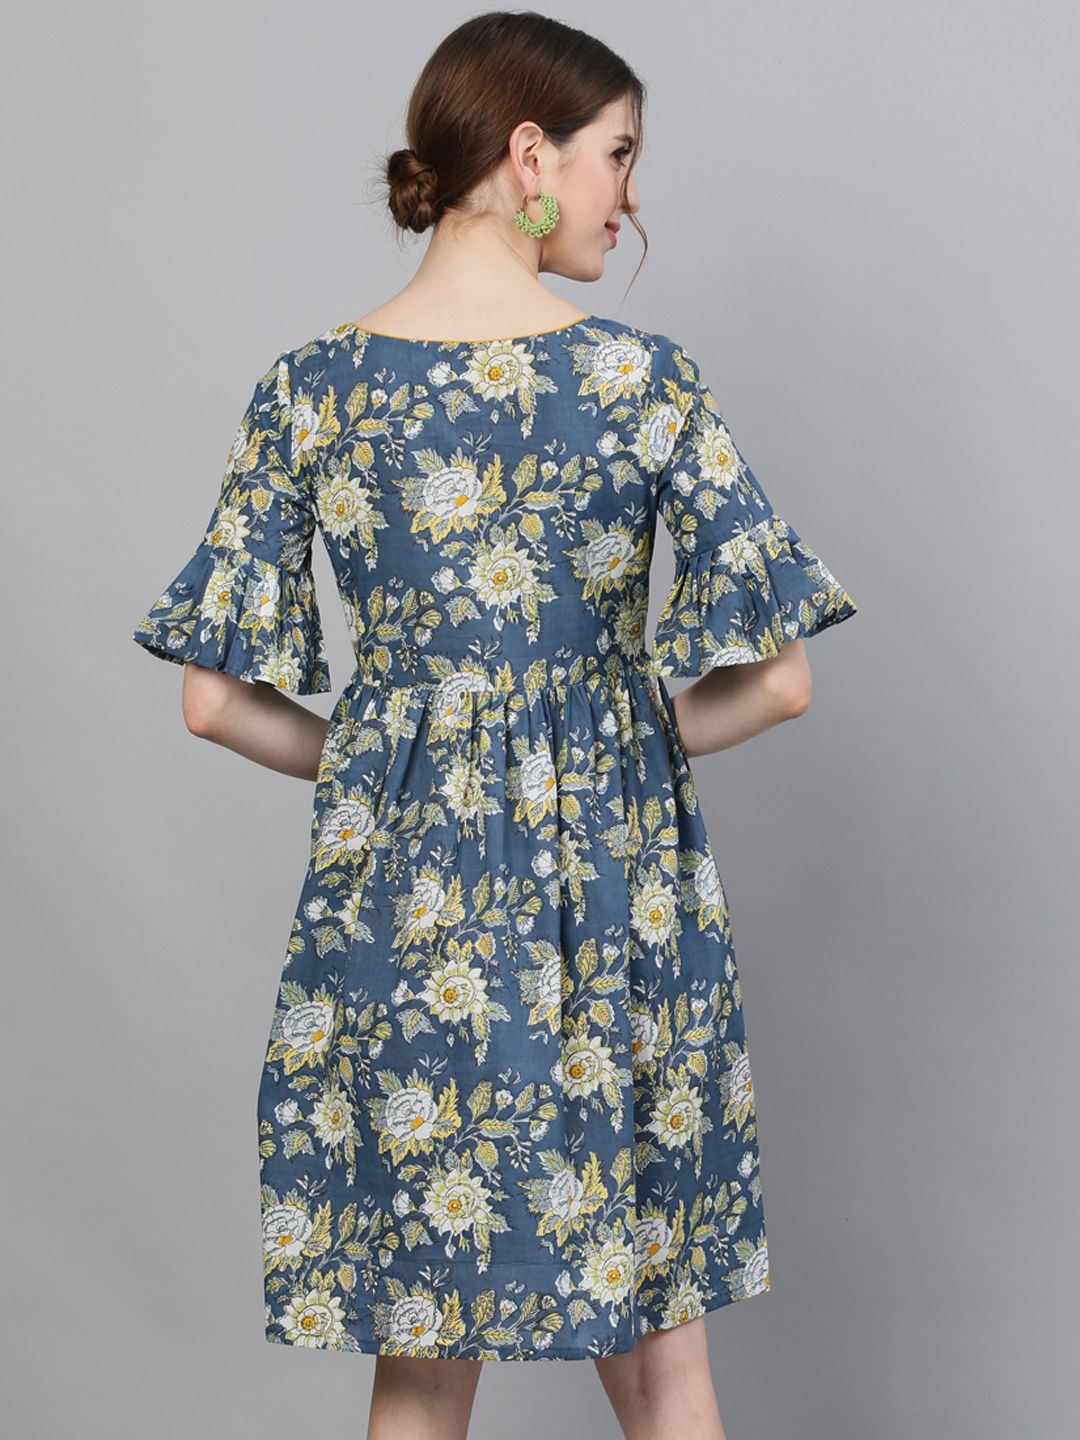 Women's Floral Printed Dress With Ruffle Sleeves - AKS